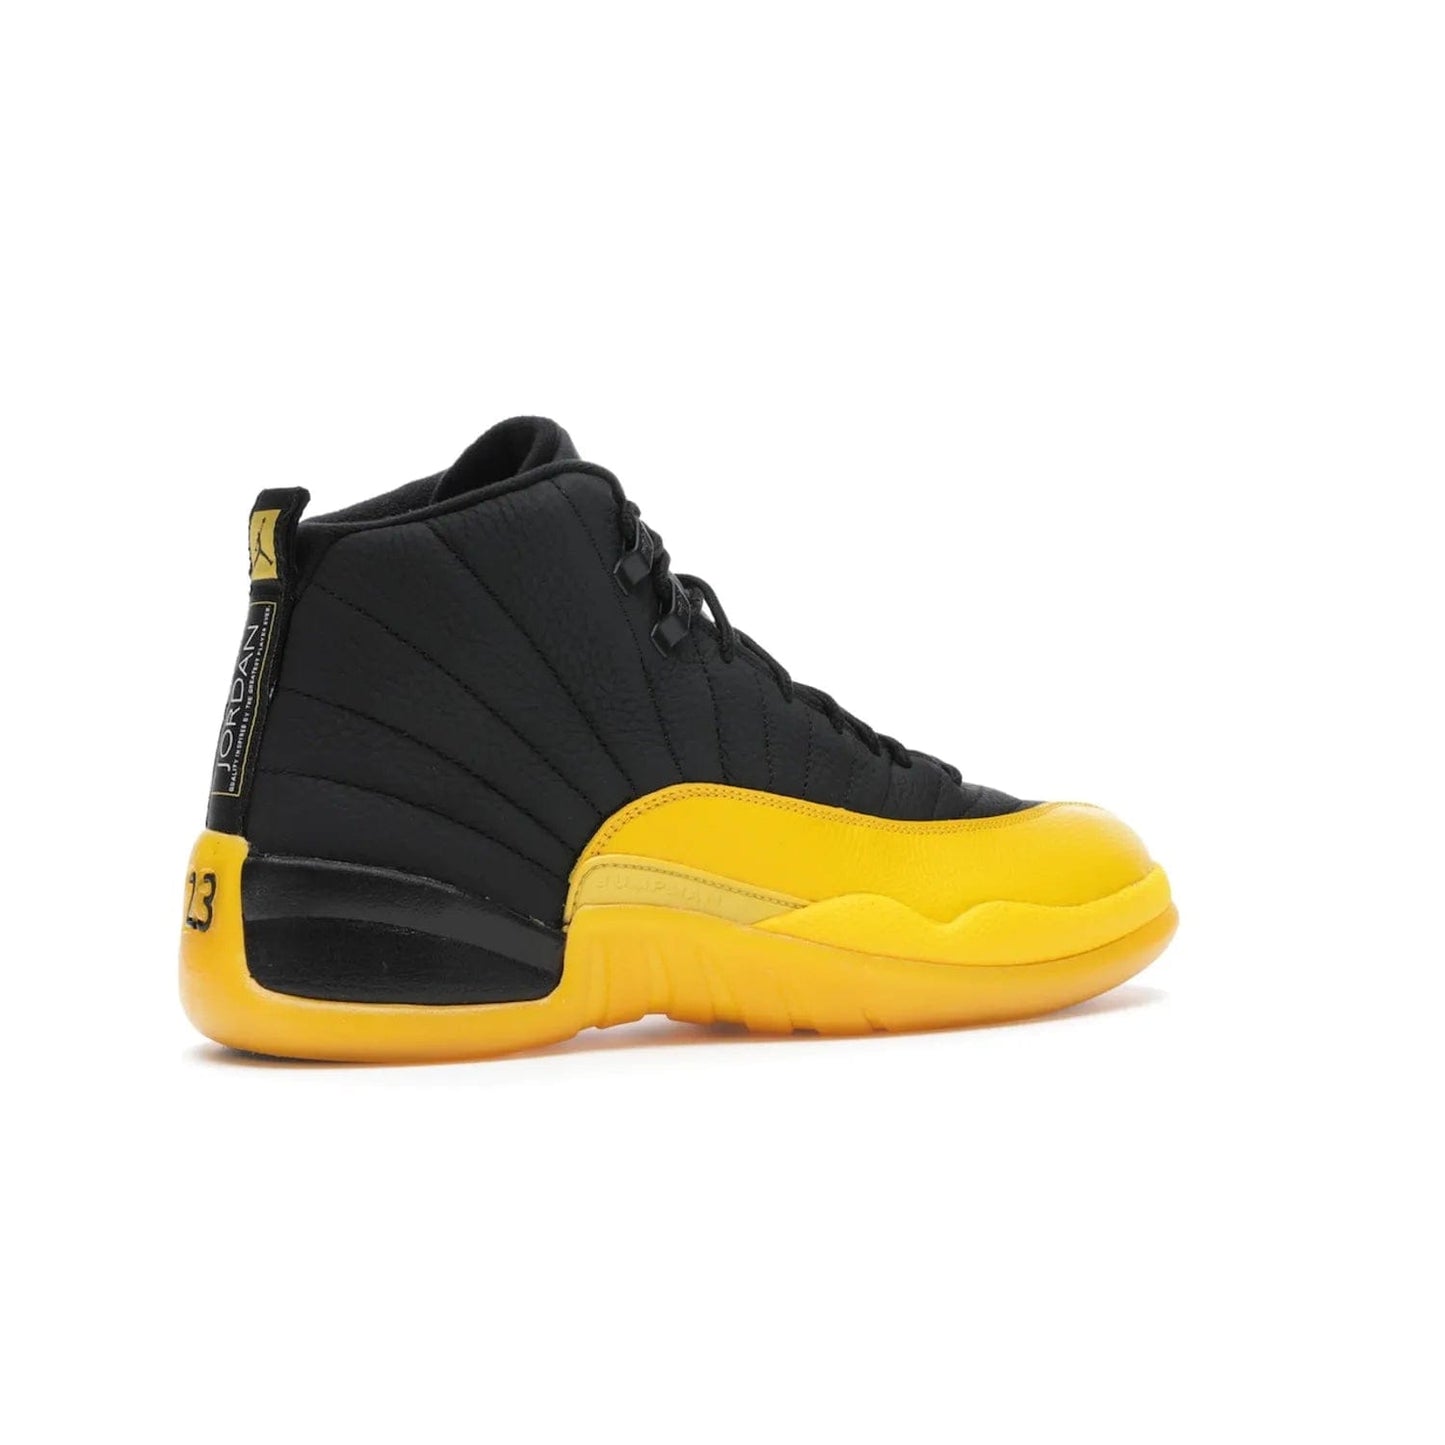 Jordan 12 Retro Black University Gold - Image 34 - Only at www.BallersClubKickz.com - This Jordan 12 Retro features a black tumbled leather upper and University Gold accents for a modern twist. Boasting Jordan "Two Three" branding and a yellow sole, these shoes will elevate your wardrobe. Fresh, sleek, and one of a kind - the Jordan 12 University Gold is your summer sneaker.